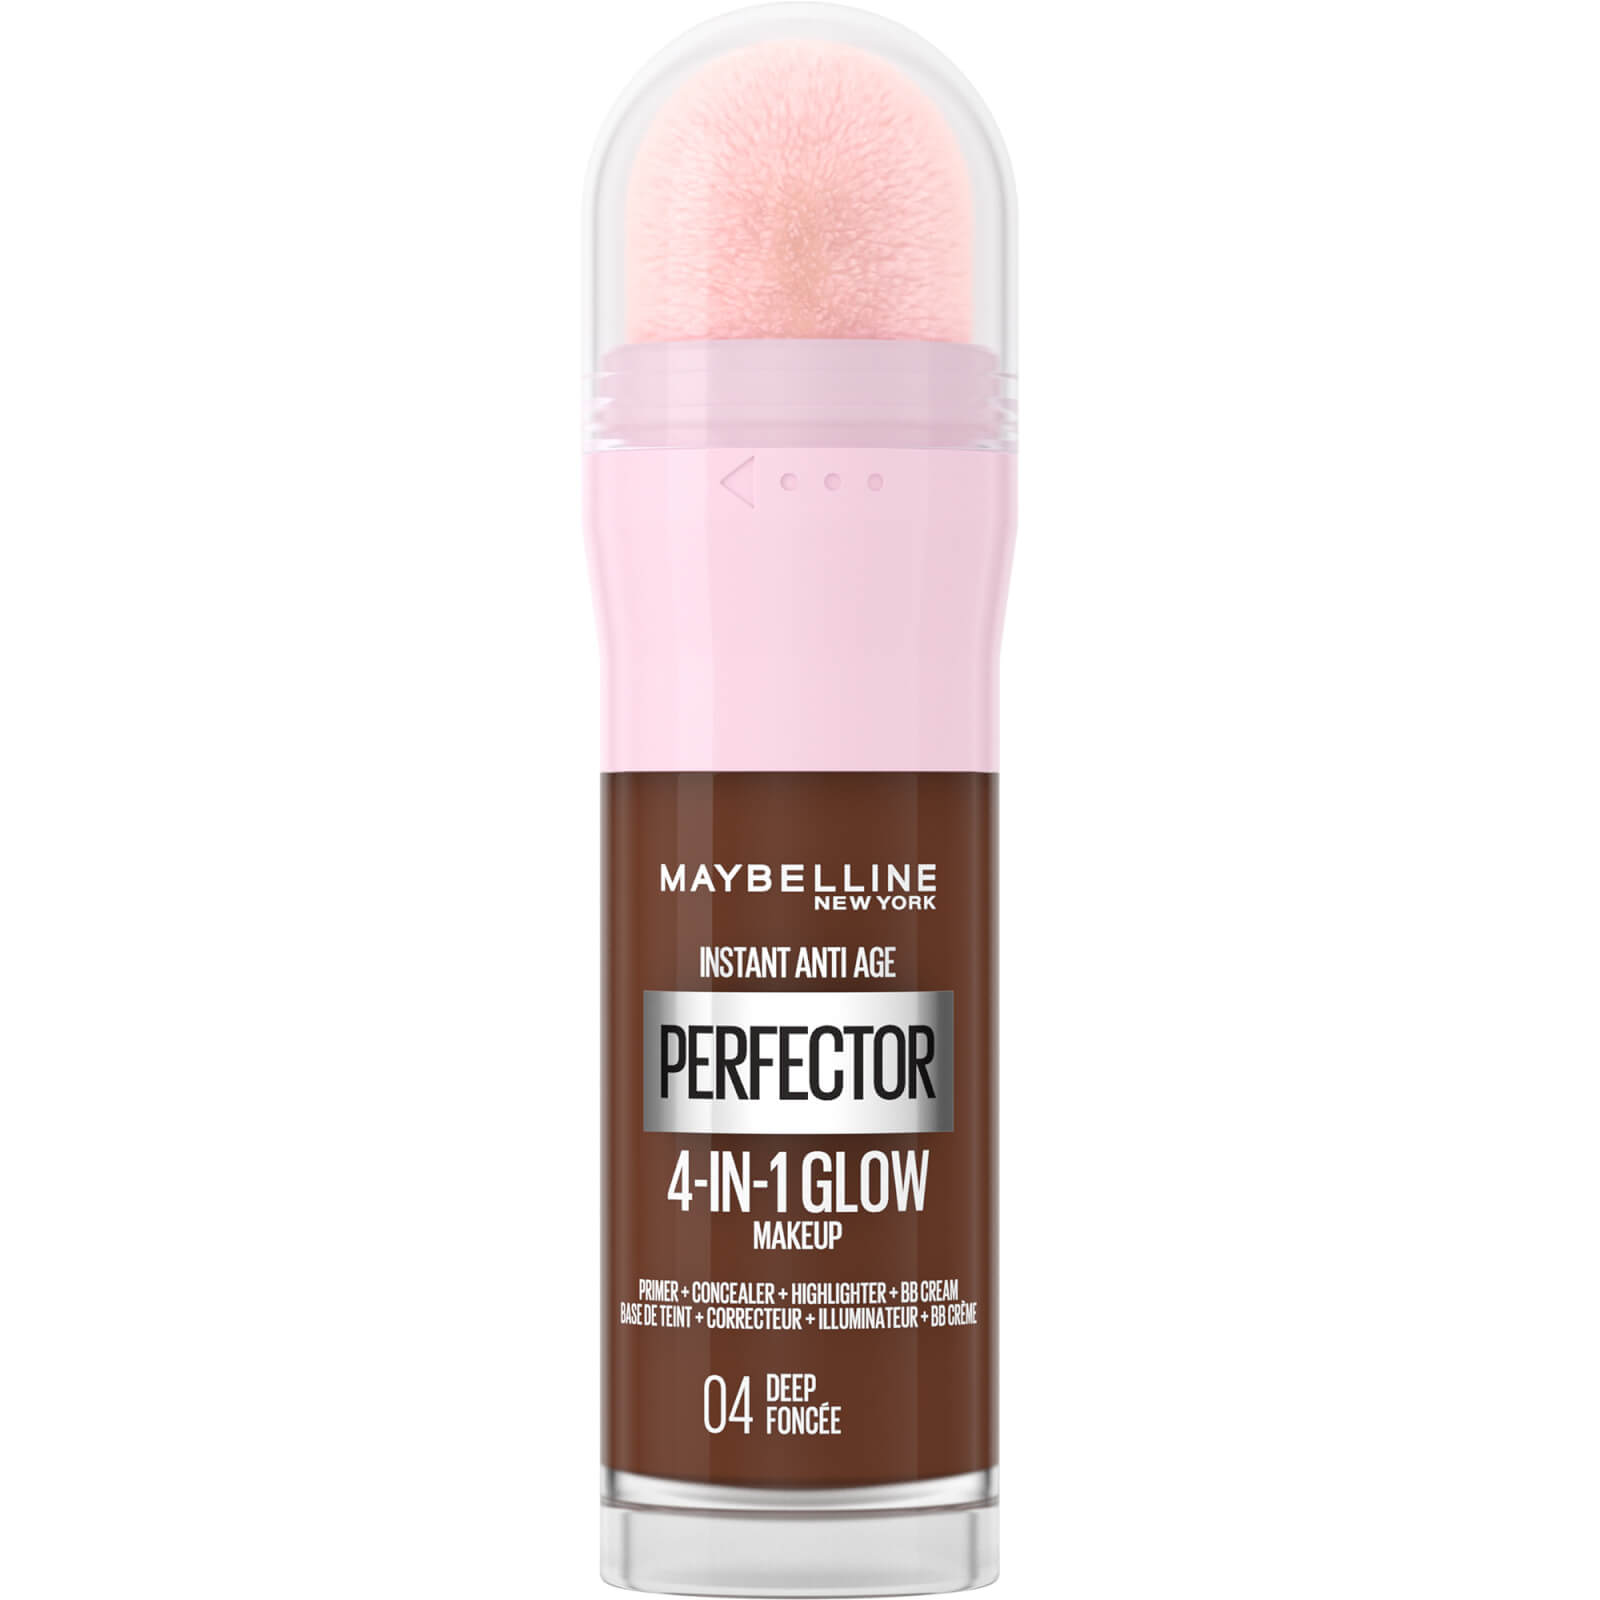 Image of Maybelline Instant Anti Age Perfector 4-in-1 Glow Primer, Concealer, Highlighter, BB Cream 20ml (Various Shades) - Deep